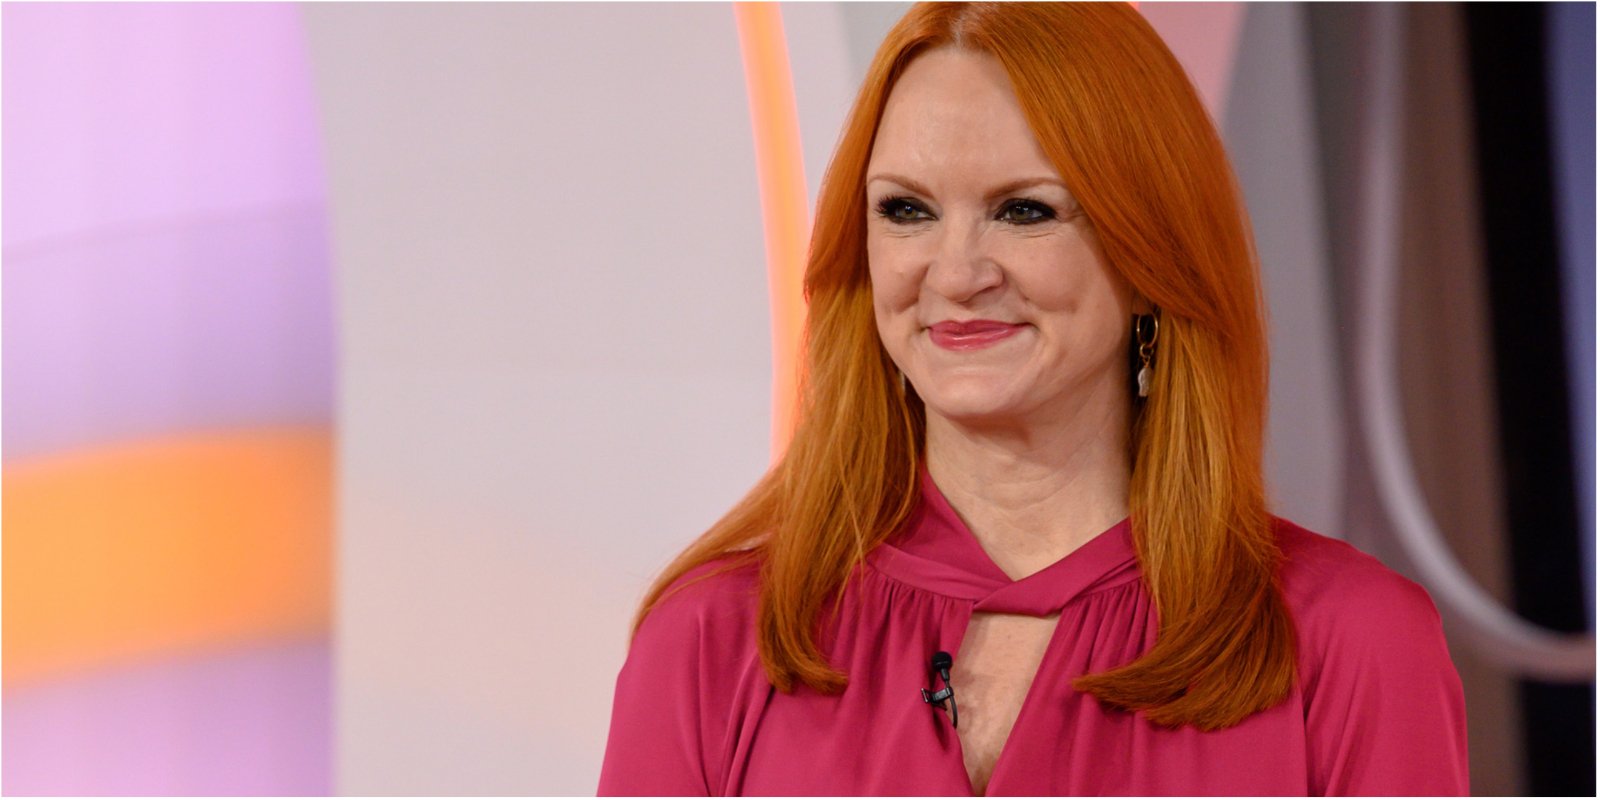 ‘The Pioneer Woman’: Yes, Viewers Have Seen the Inside of Ree Drummond’s Real Home